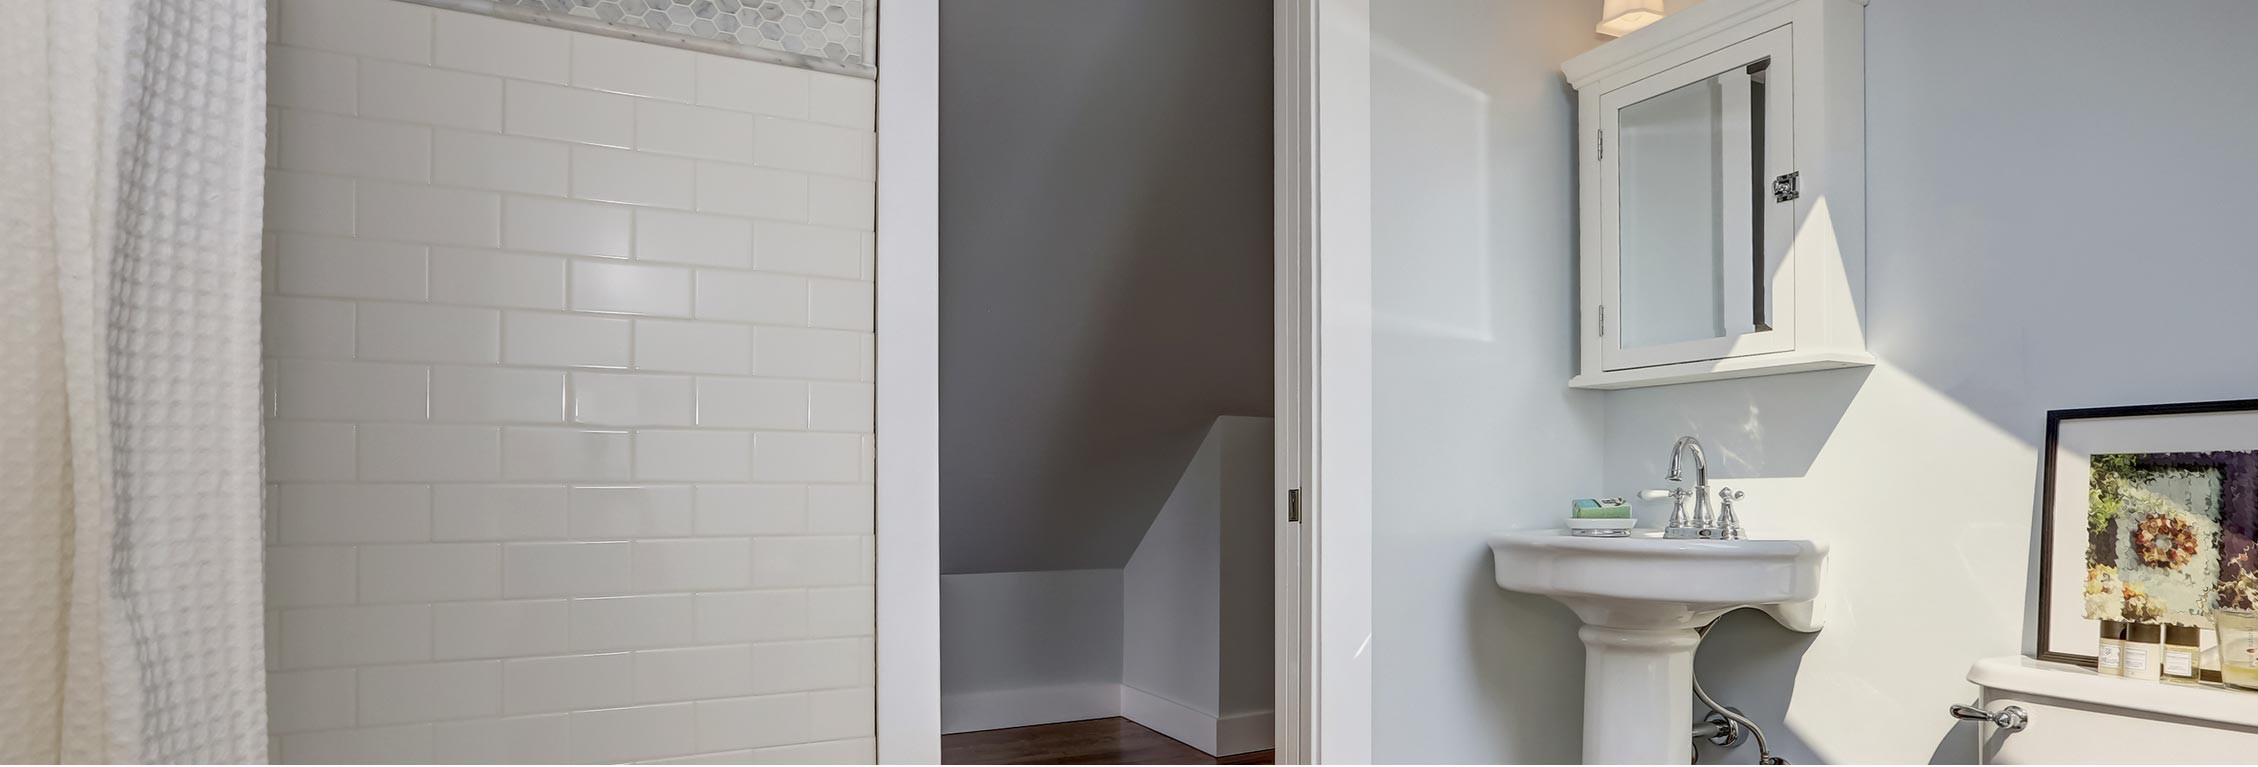 Paint Sheen For Bathroom
 What Sheen Paint Should You Use In A Bathroom